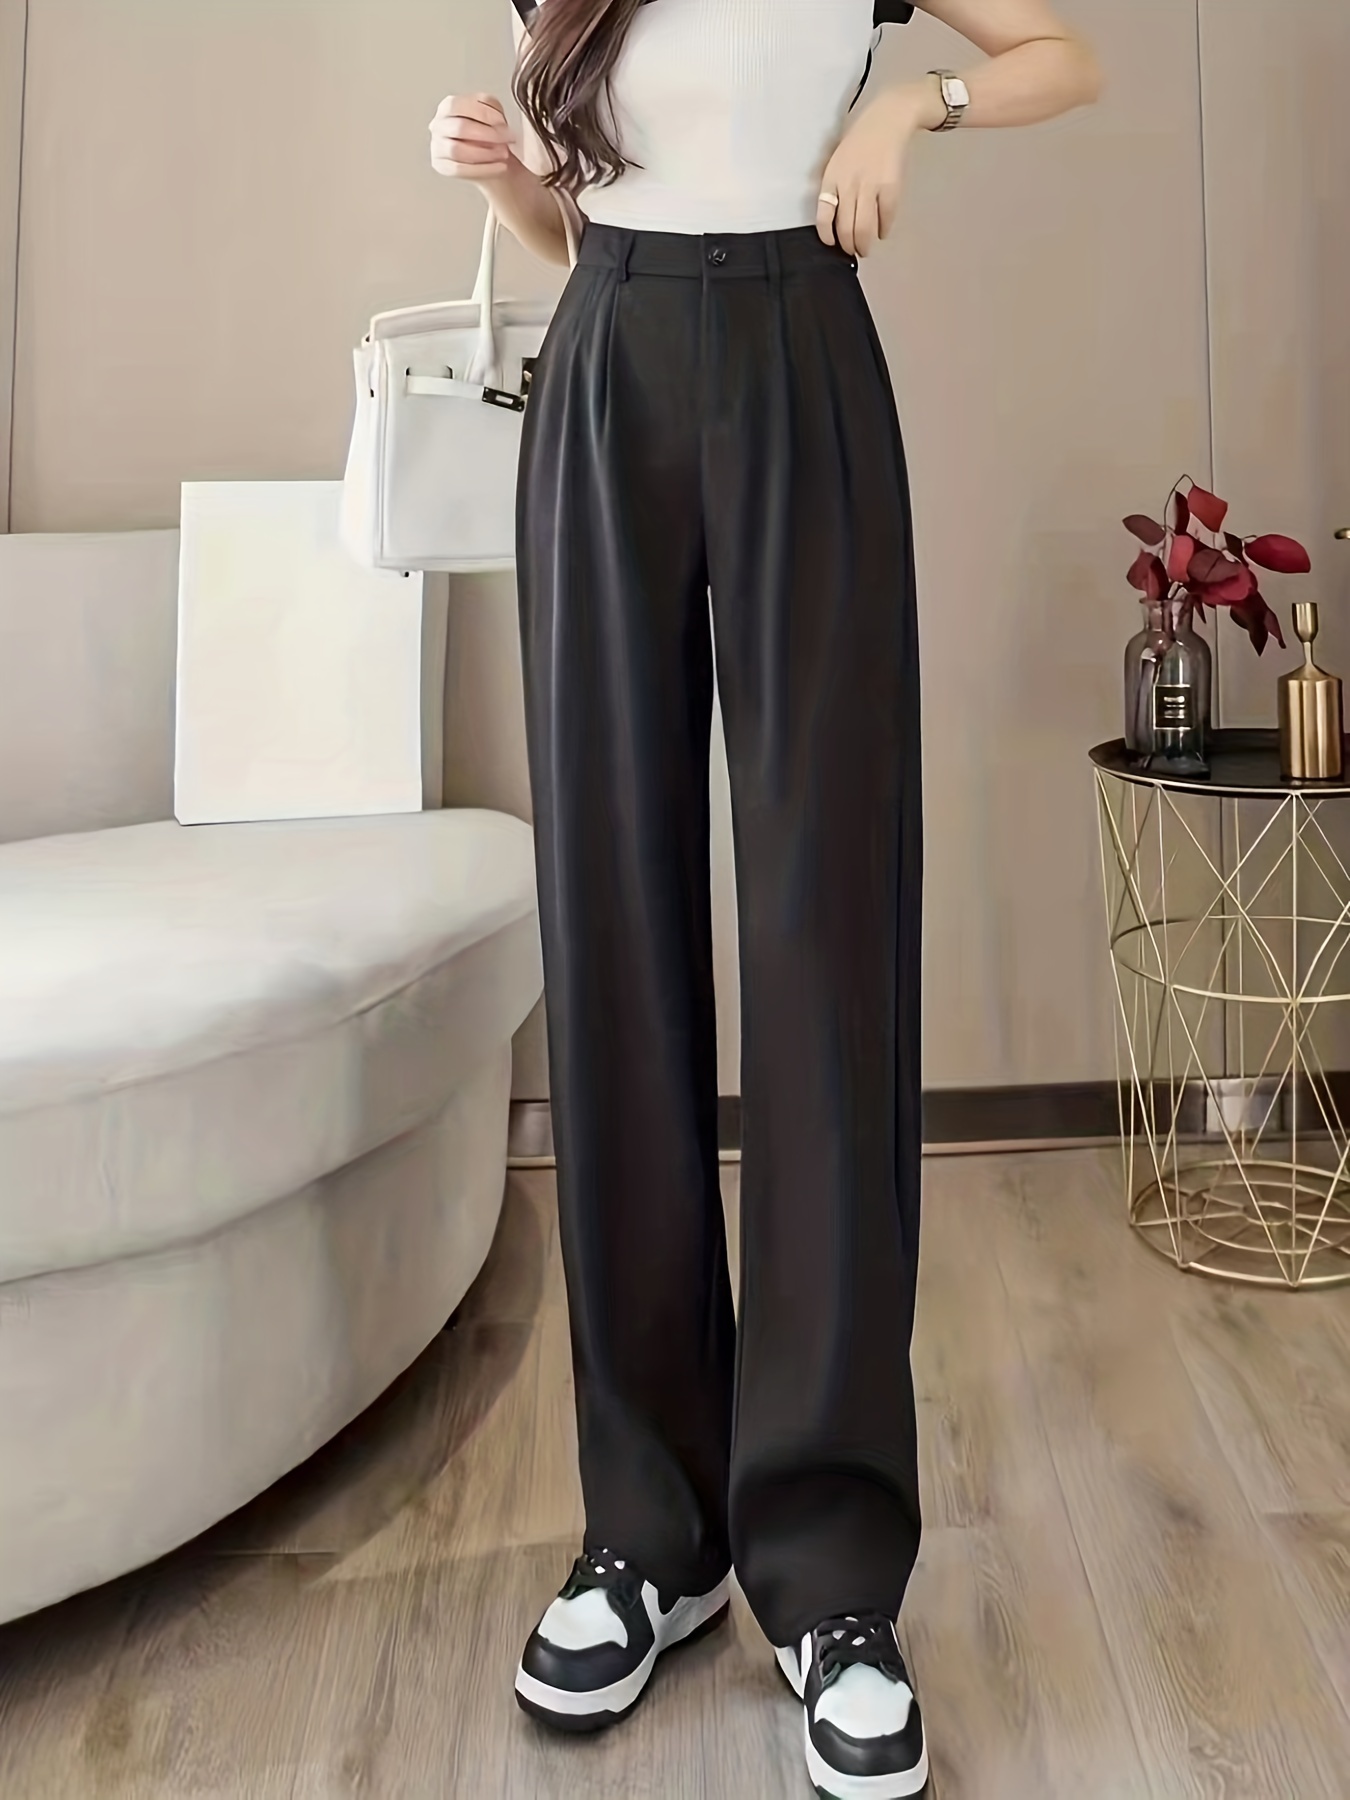 adviicd Womens Business Casual Pants For Work Casual Dresses For